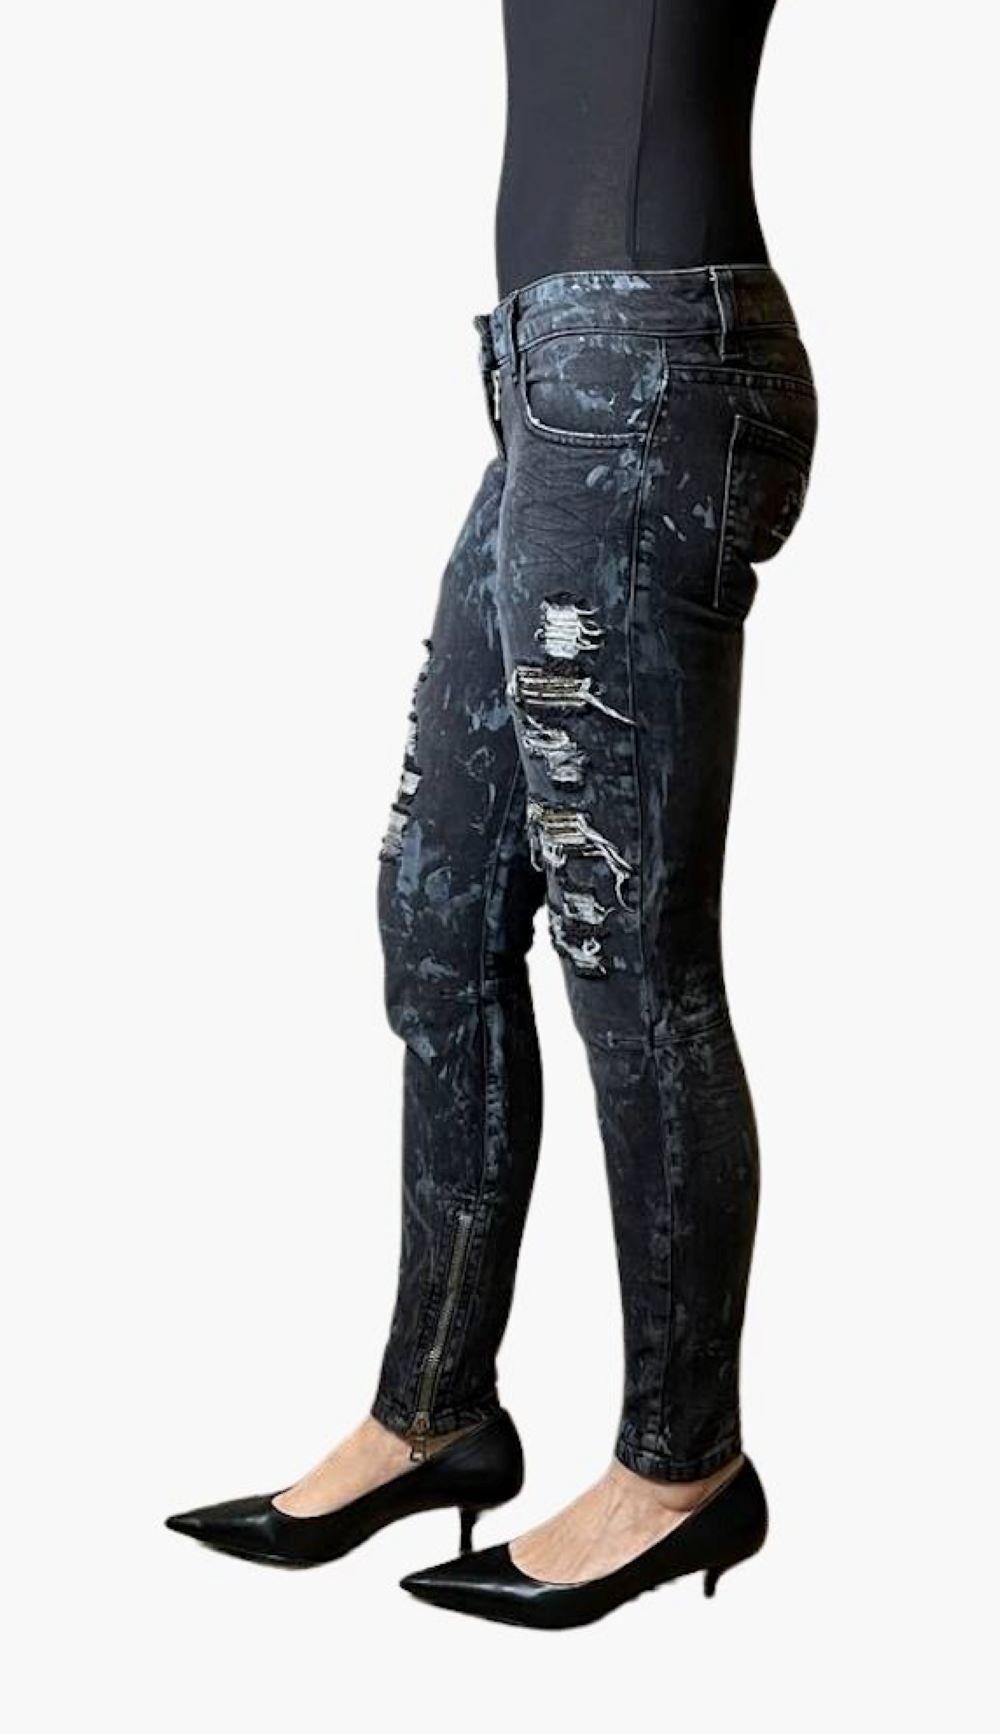 Balmain Runway distressed washed dark grey jeans from spring summer 2009 collection. 
Low waist. 
Stretch-cotton denim
Size: 36Fr (XS)
Length: 86cm
Condition: Very good

......Additional information ........

- Photo might be slightly different from